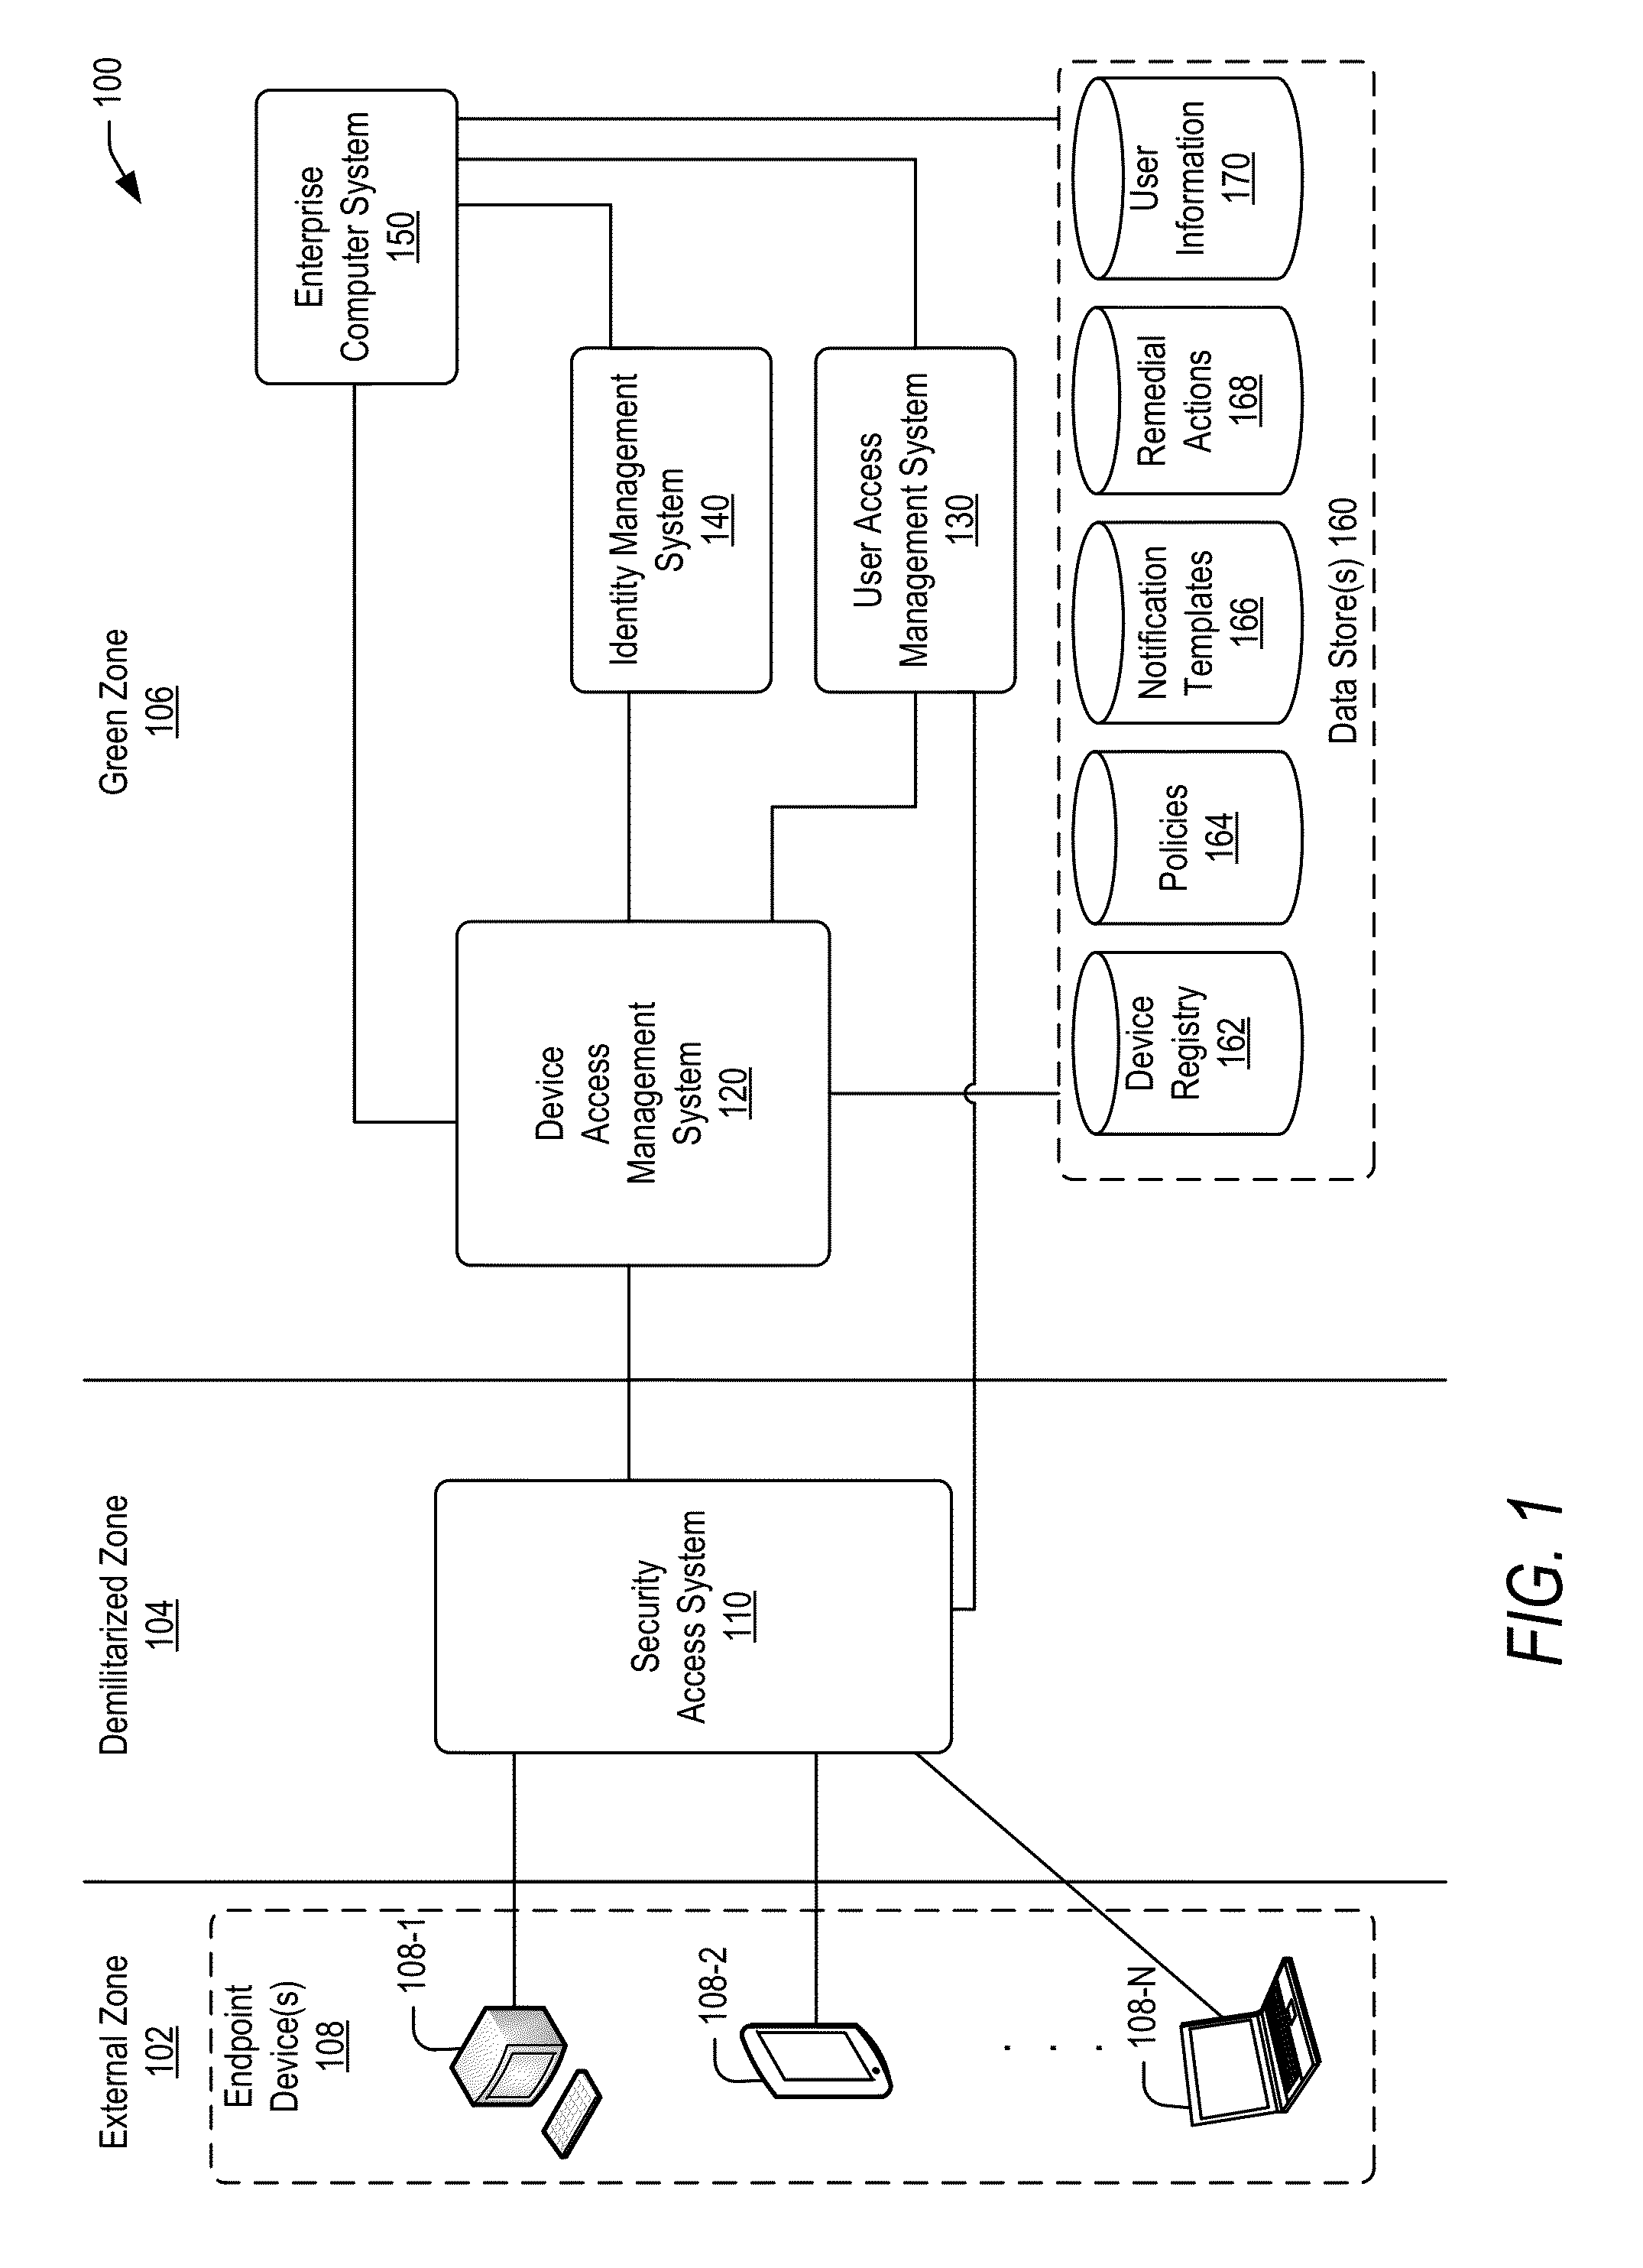 Policy-based compliance management and remediation of devices in an enterprise system